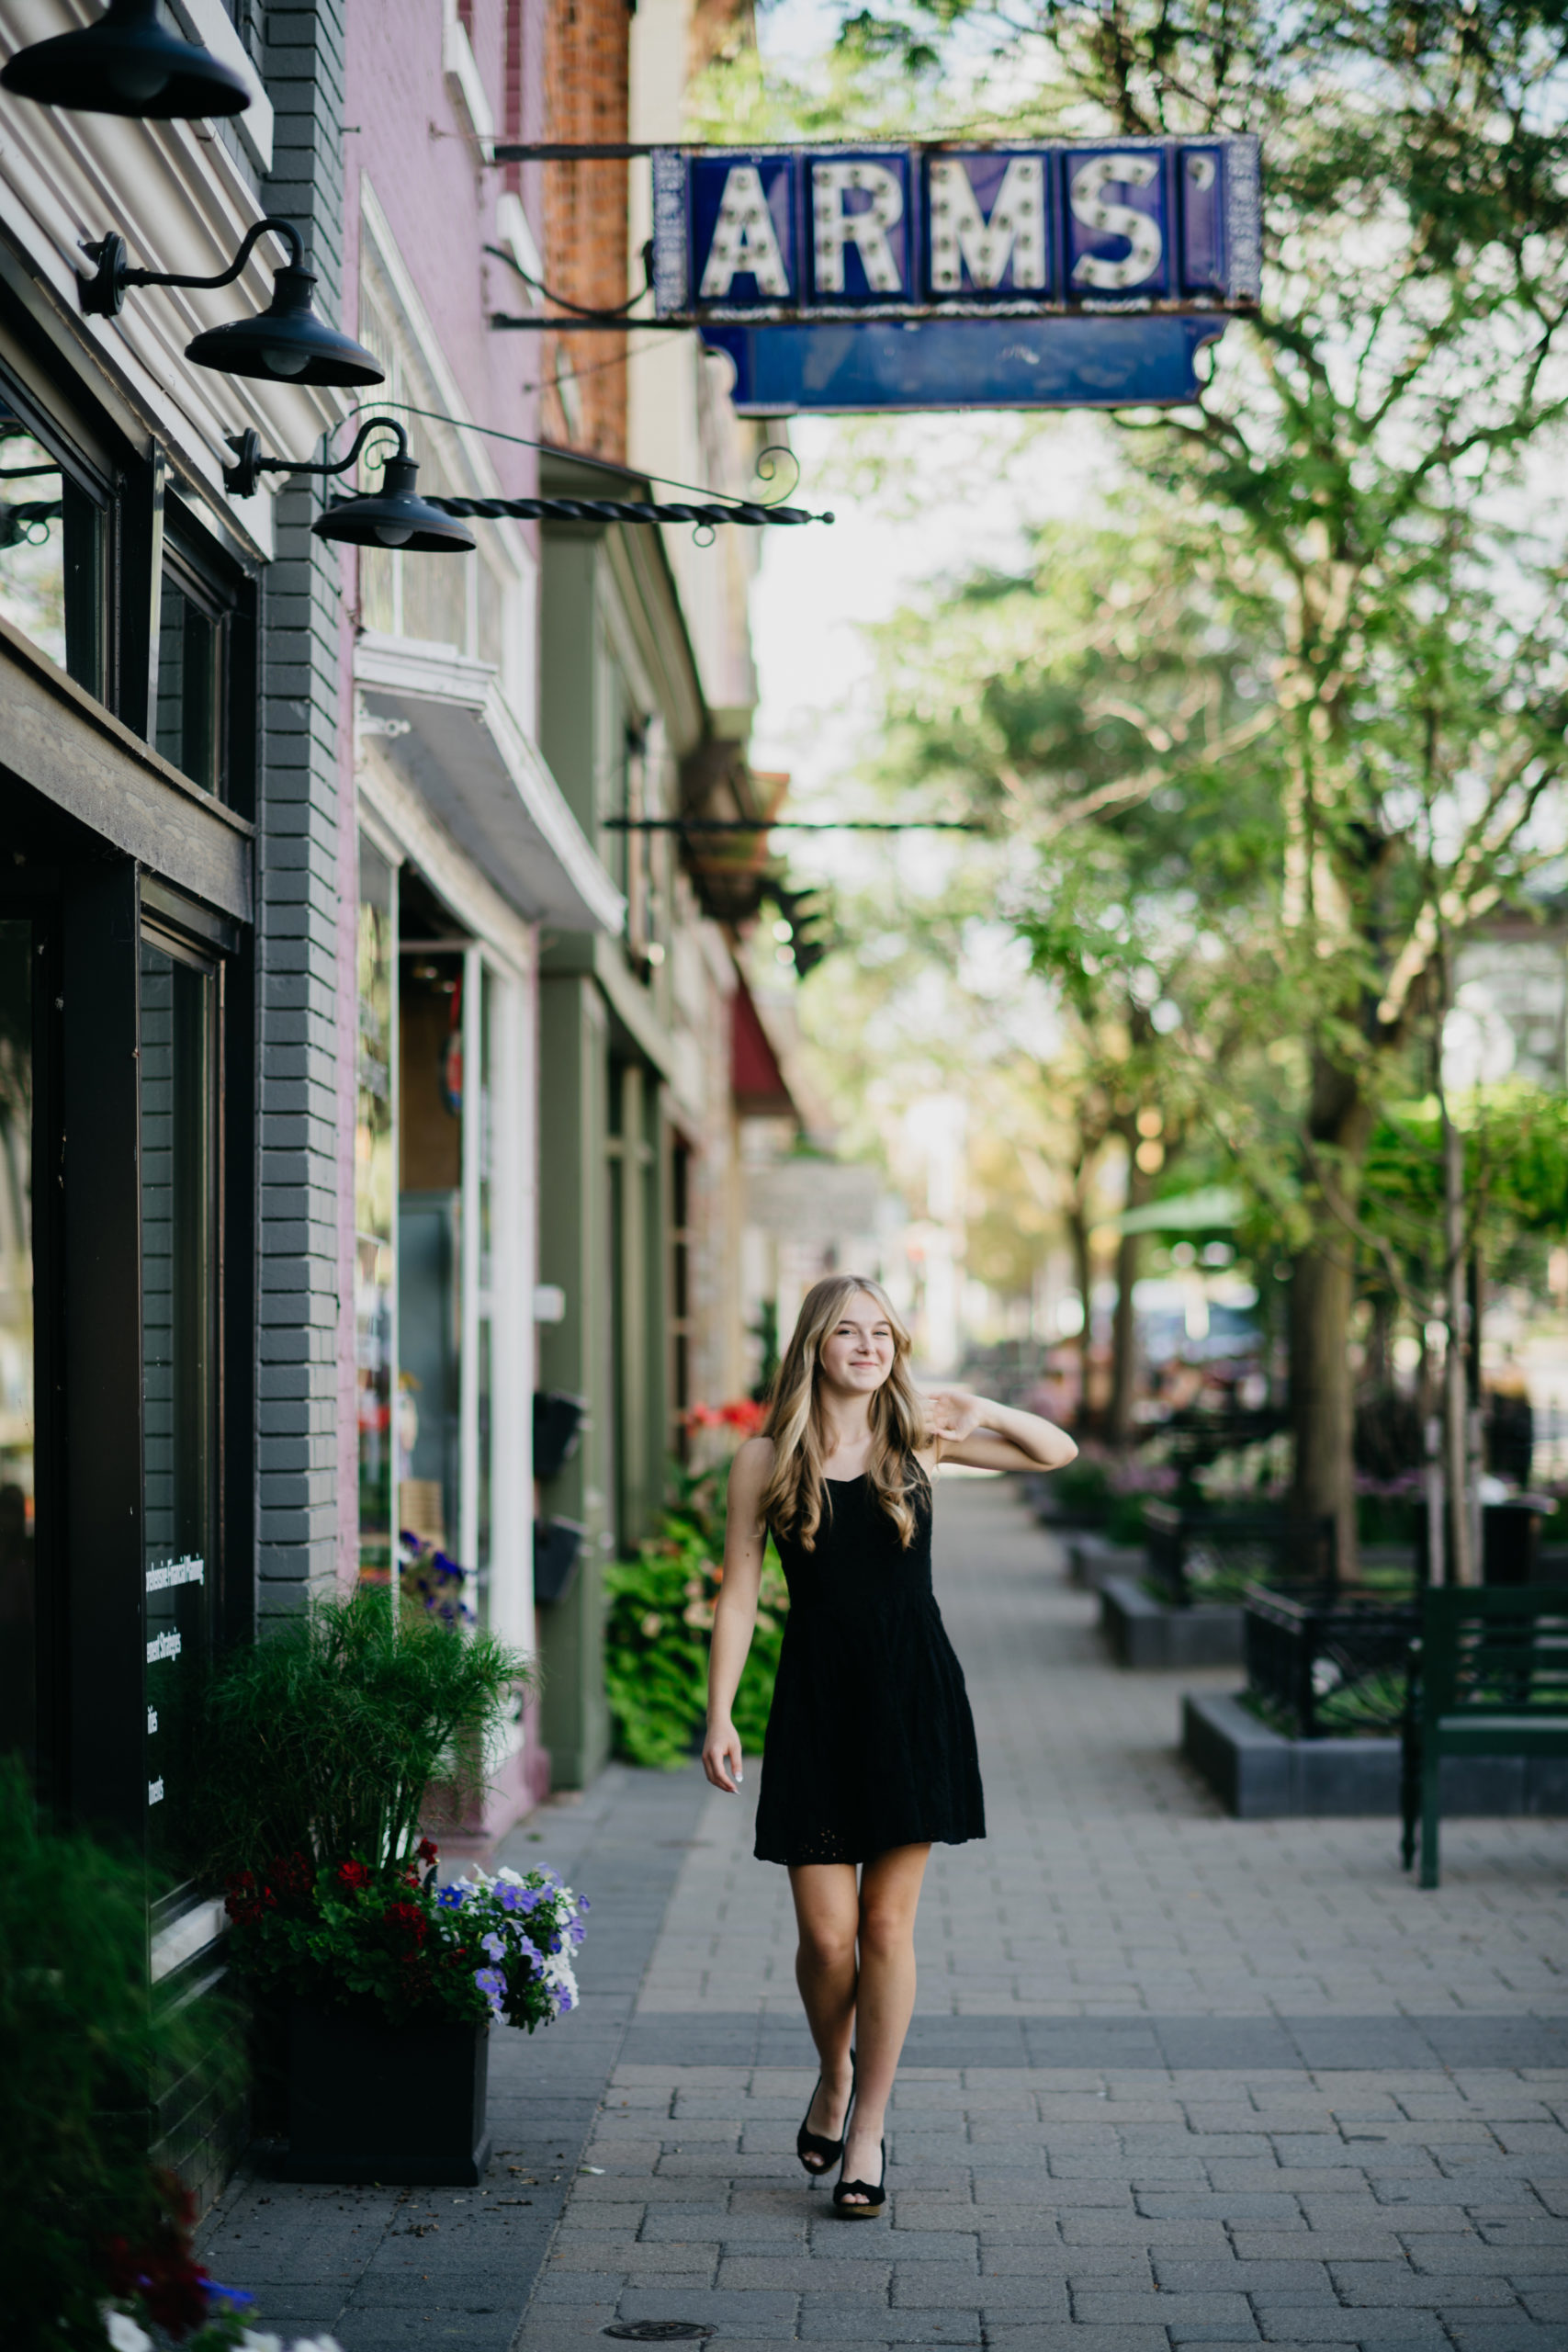 Jolie's senior shoot in Downtown Milford Michigan was one of the most gorgeous summer evenings we've had to date!